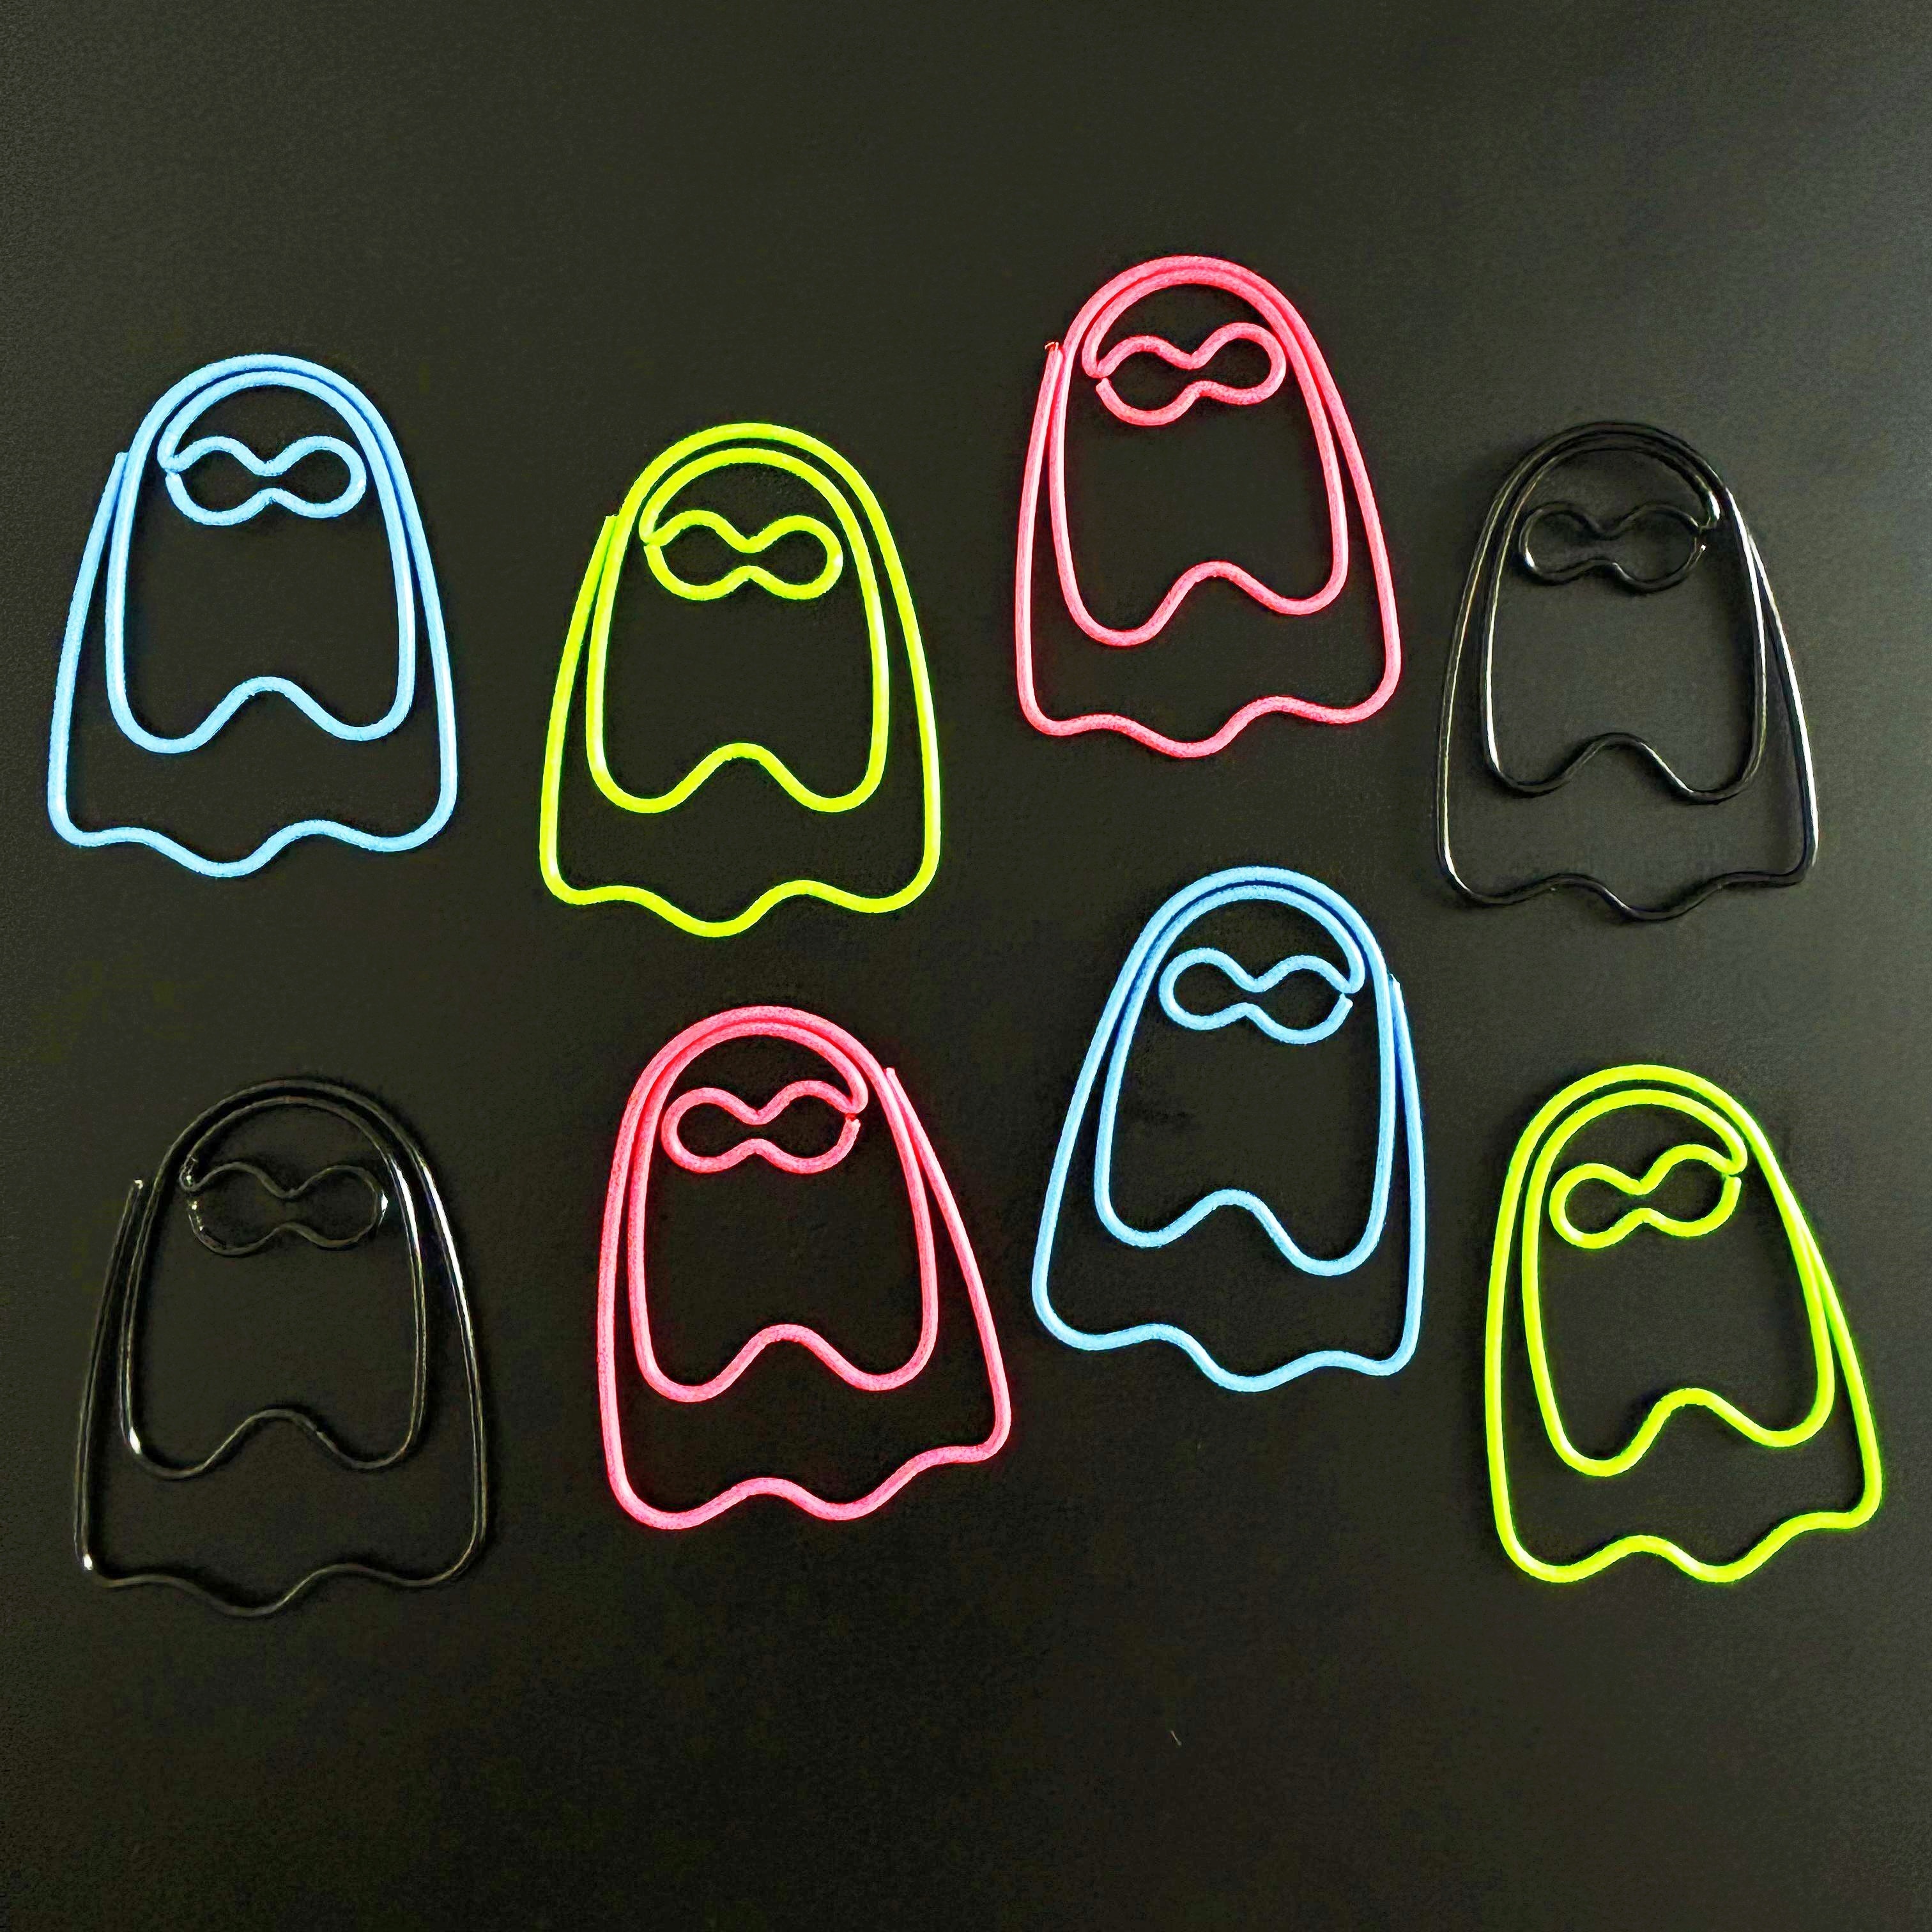 

30pcs/60pcs Ghost-shaped Paper Clips Funny Cute Metal Paper Clip Bookmark For School, Gift And Office Supplies